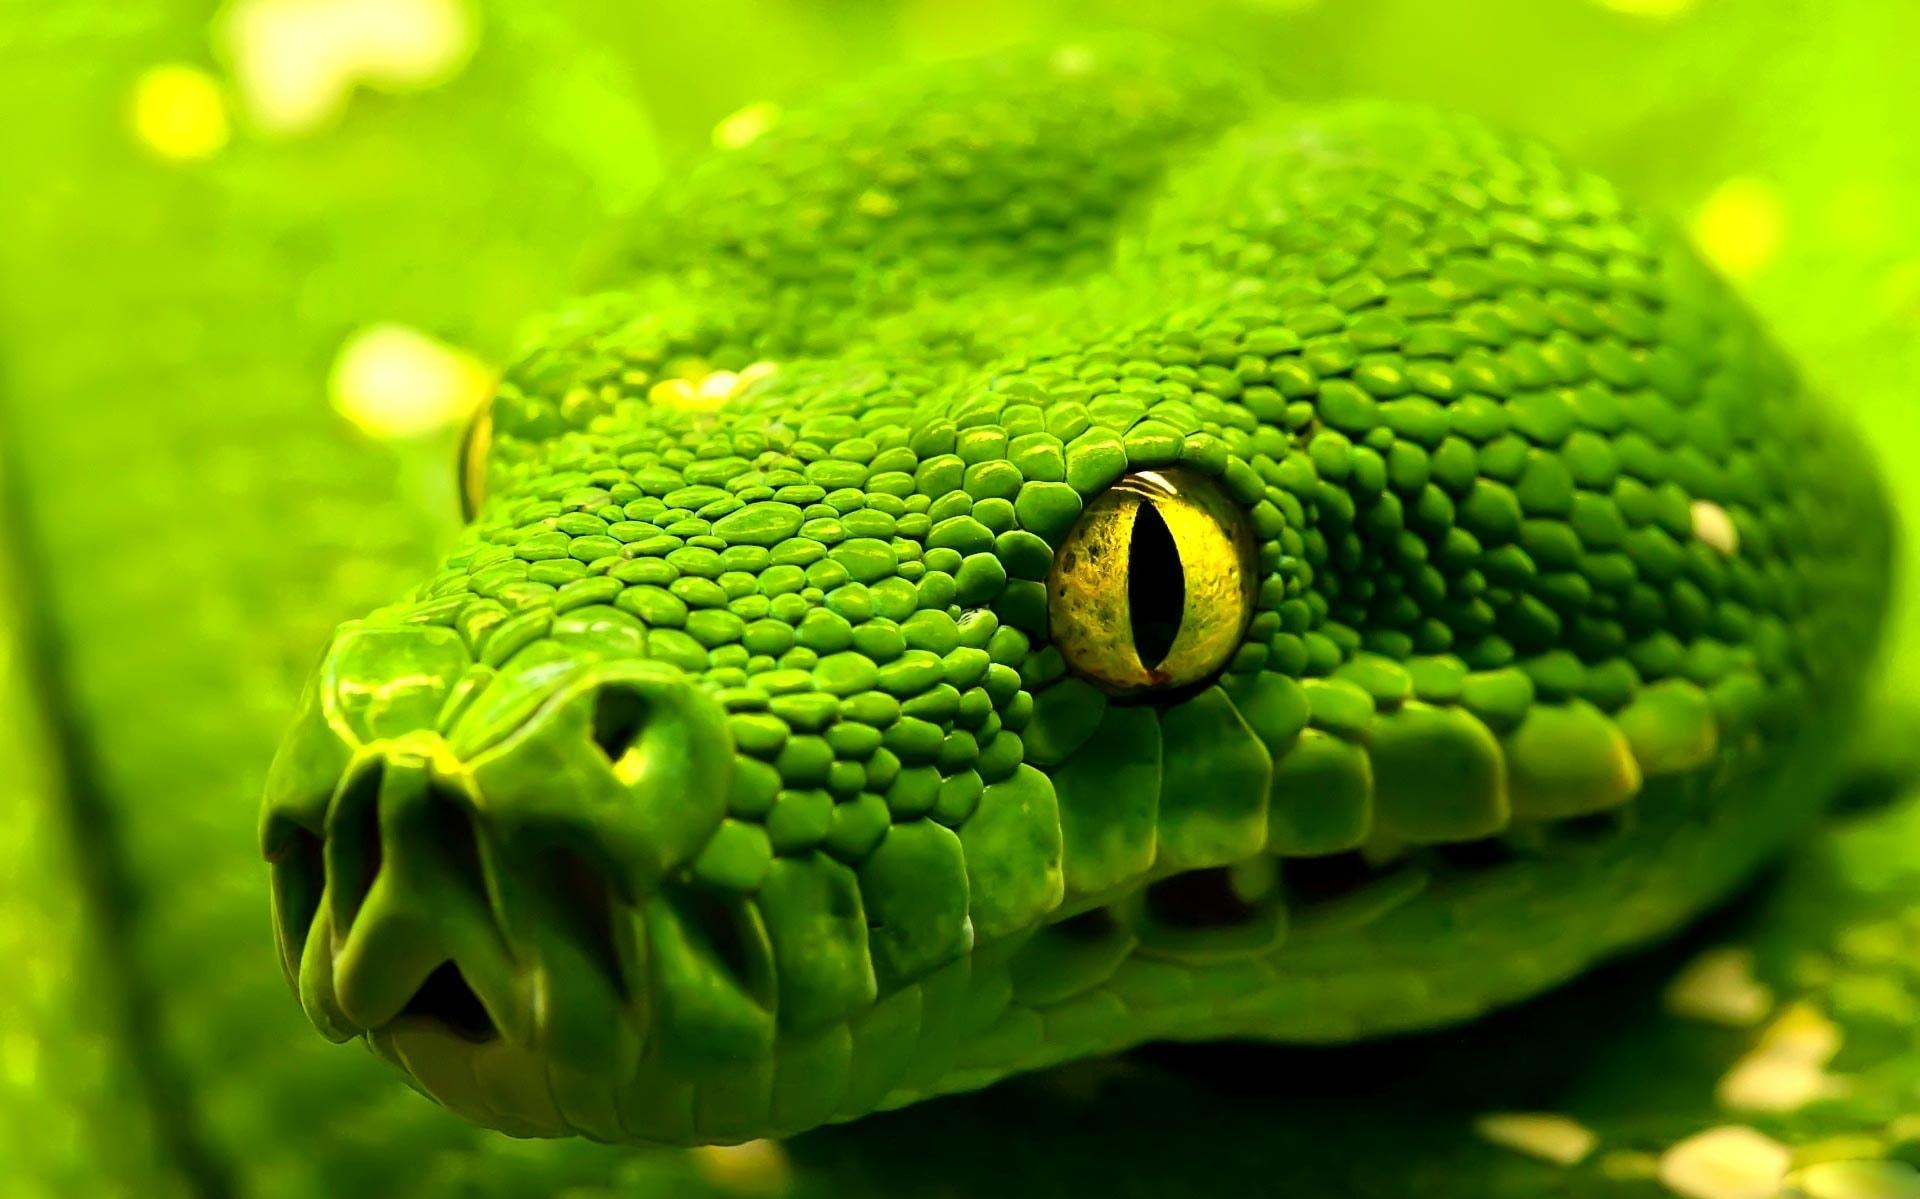 HD Snake Wallpaper Amazon Appstore For Android